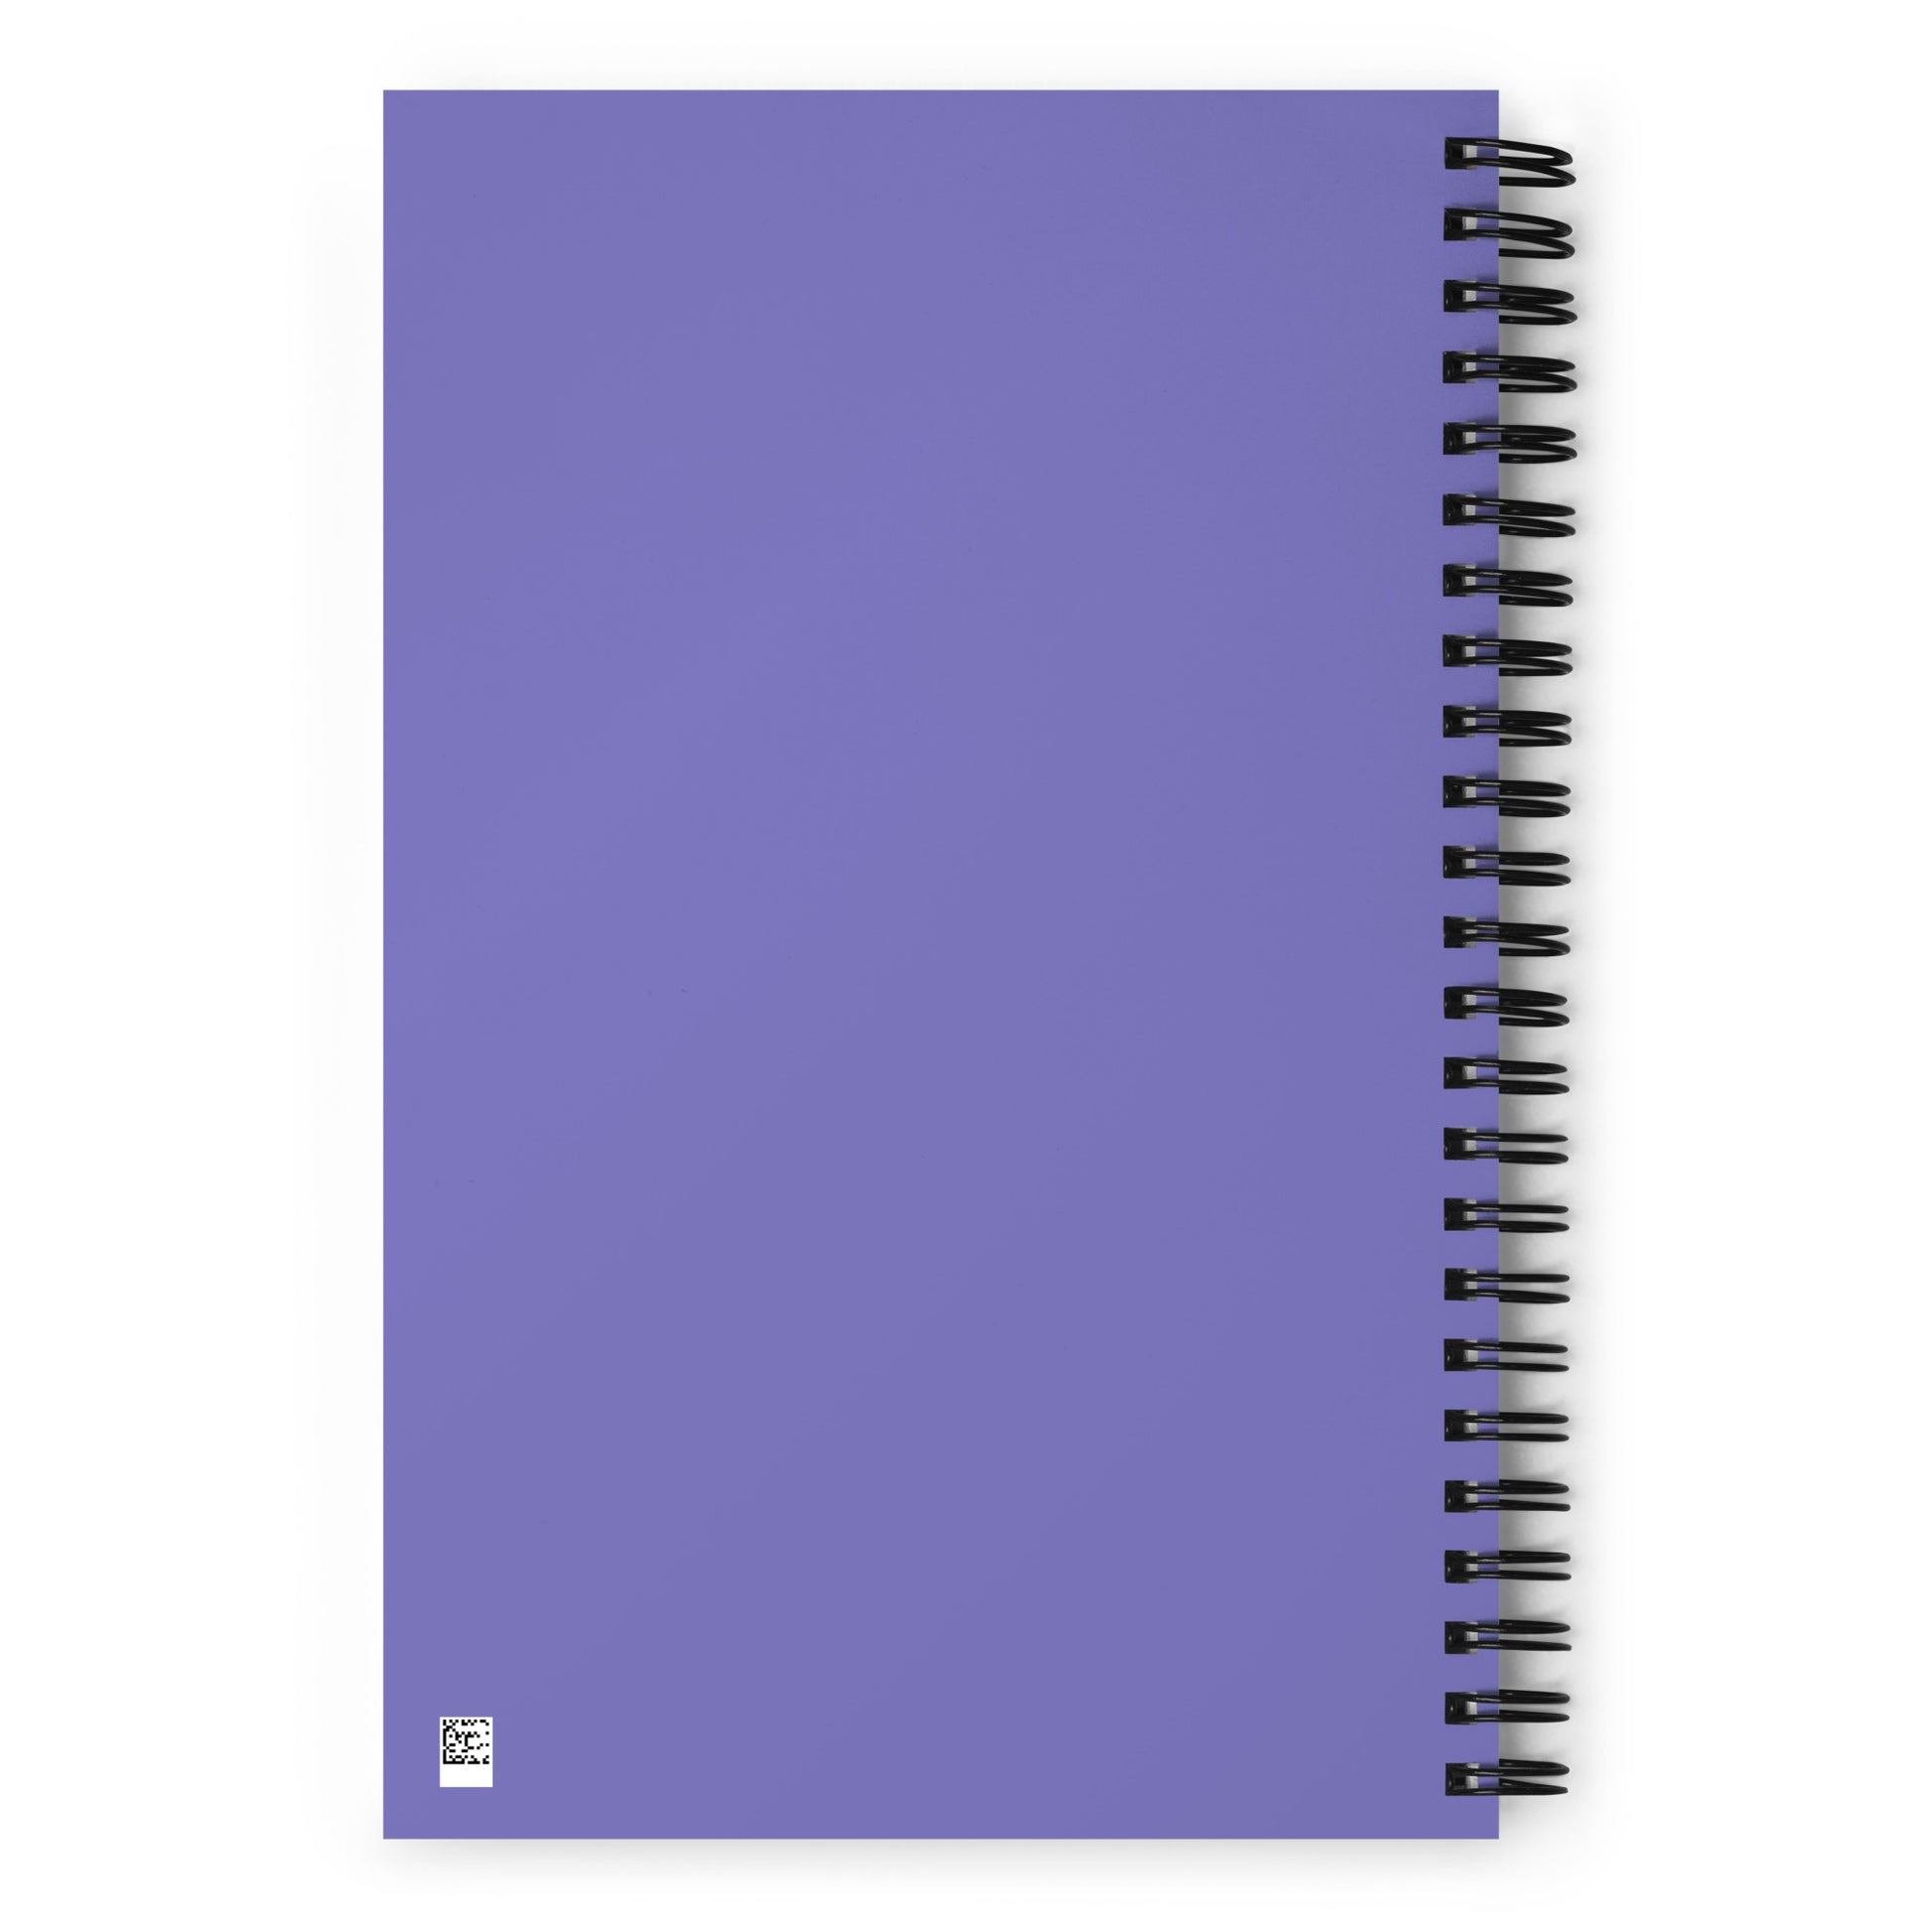 The back of a purple, wire-bound notebook.